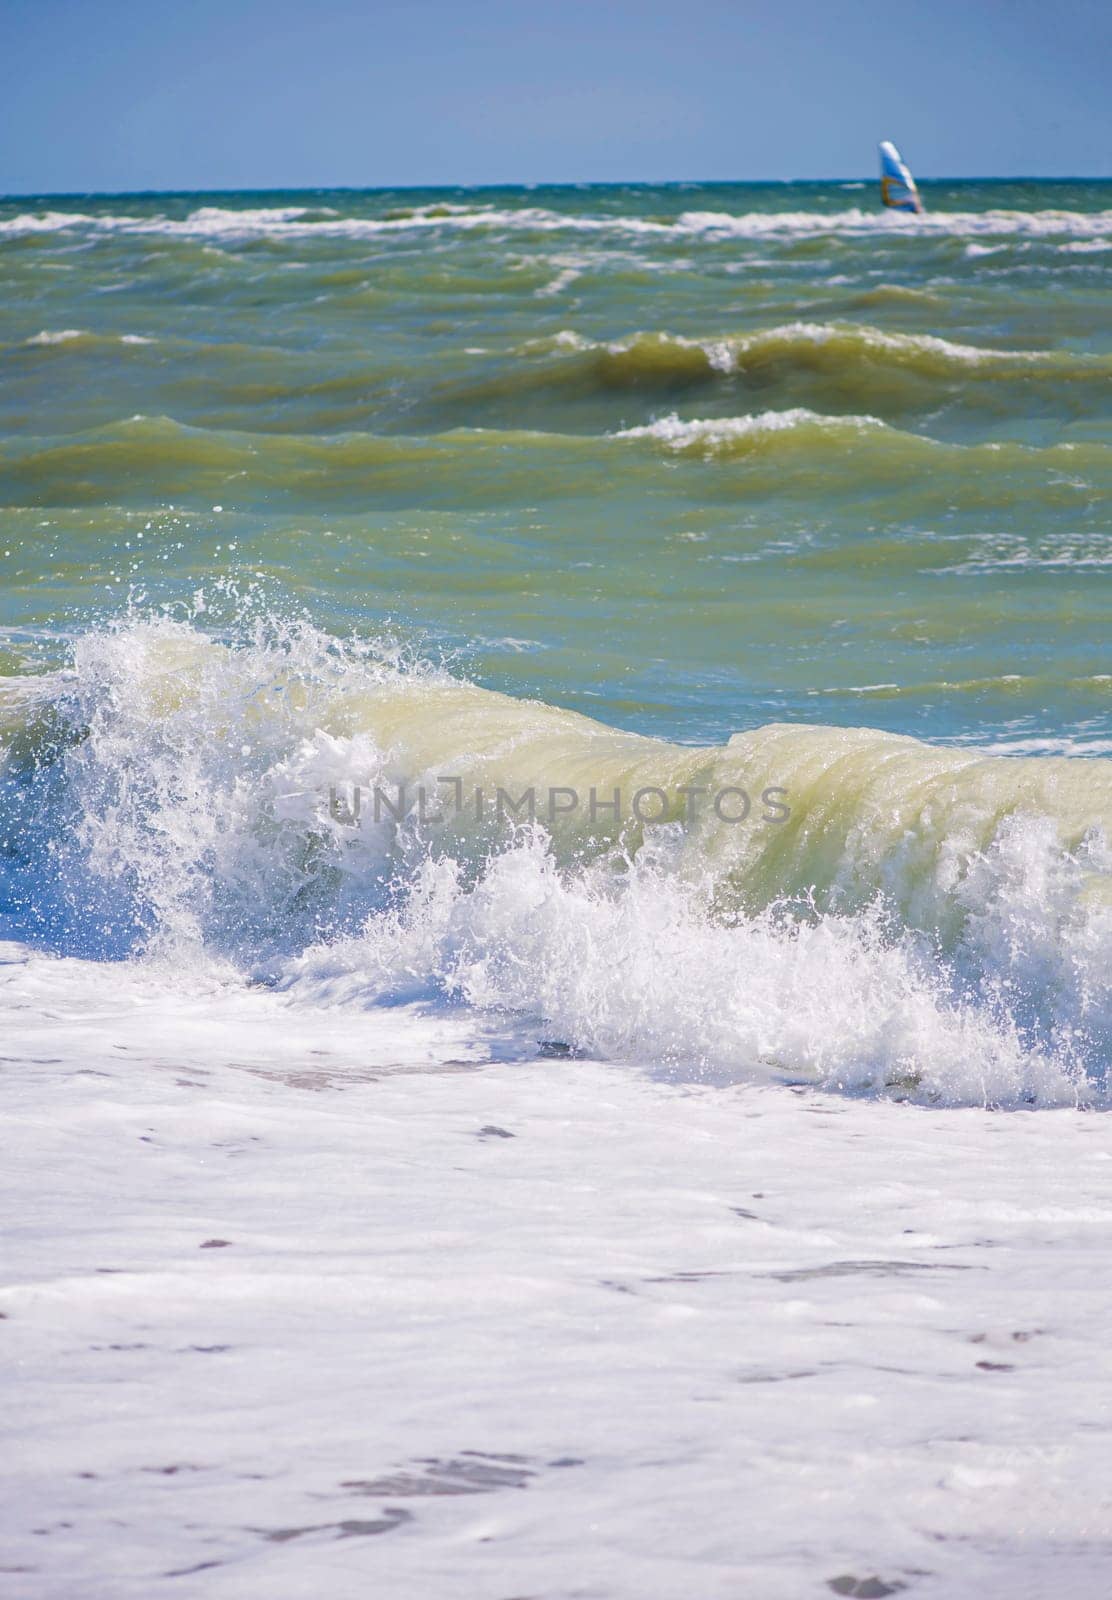 The sea is stormy. Sea of Azov. Water edge, sea, wave, storm - marine natural background. Birds seagulls on the sea coast, a beach by aprilphoto